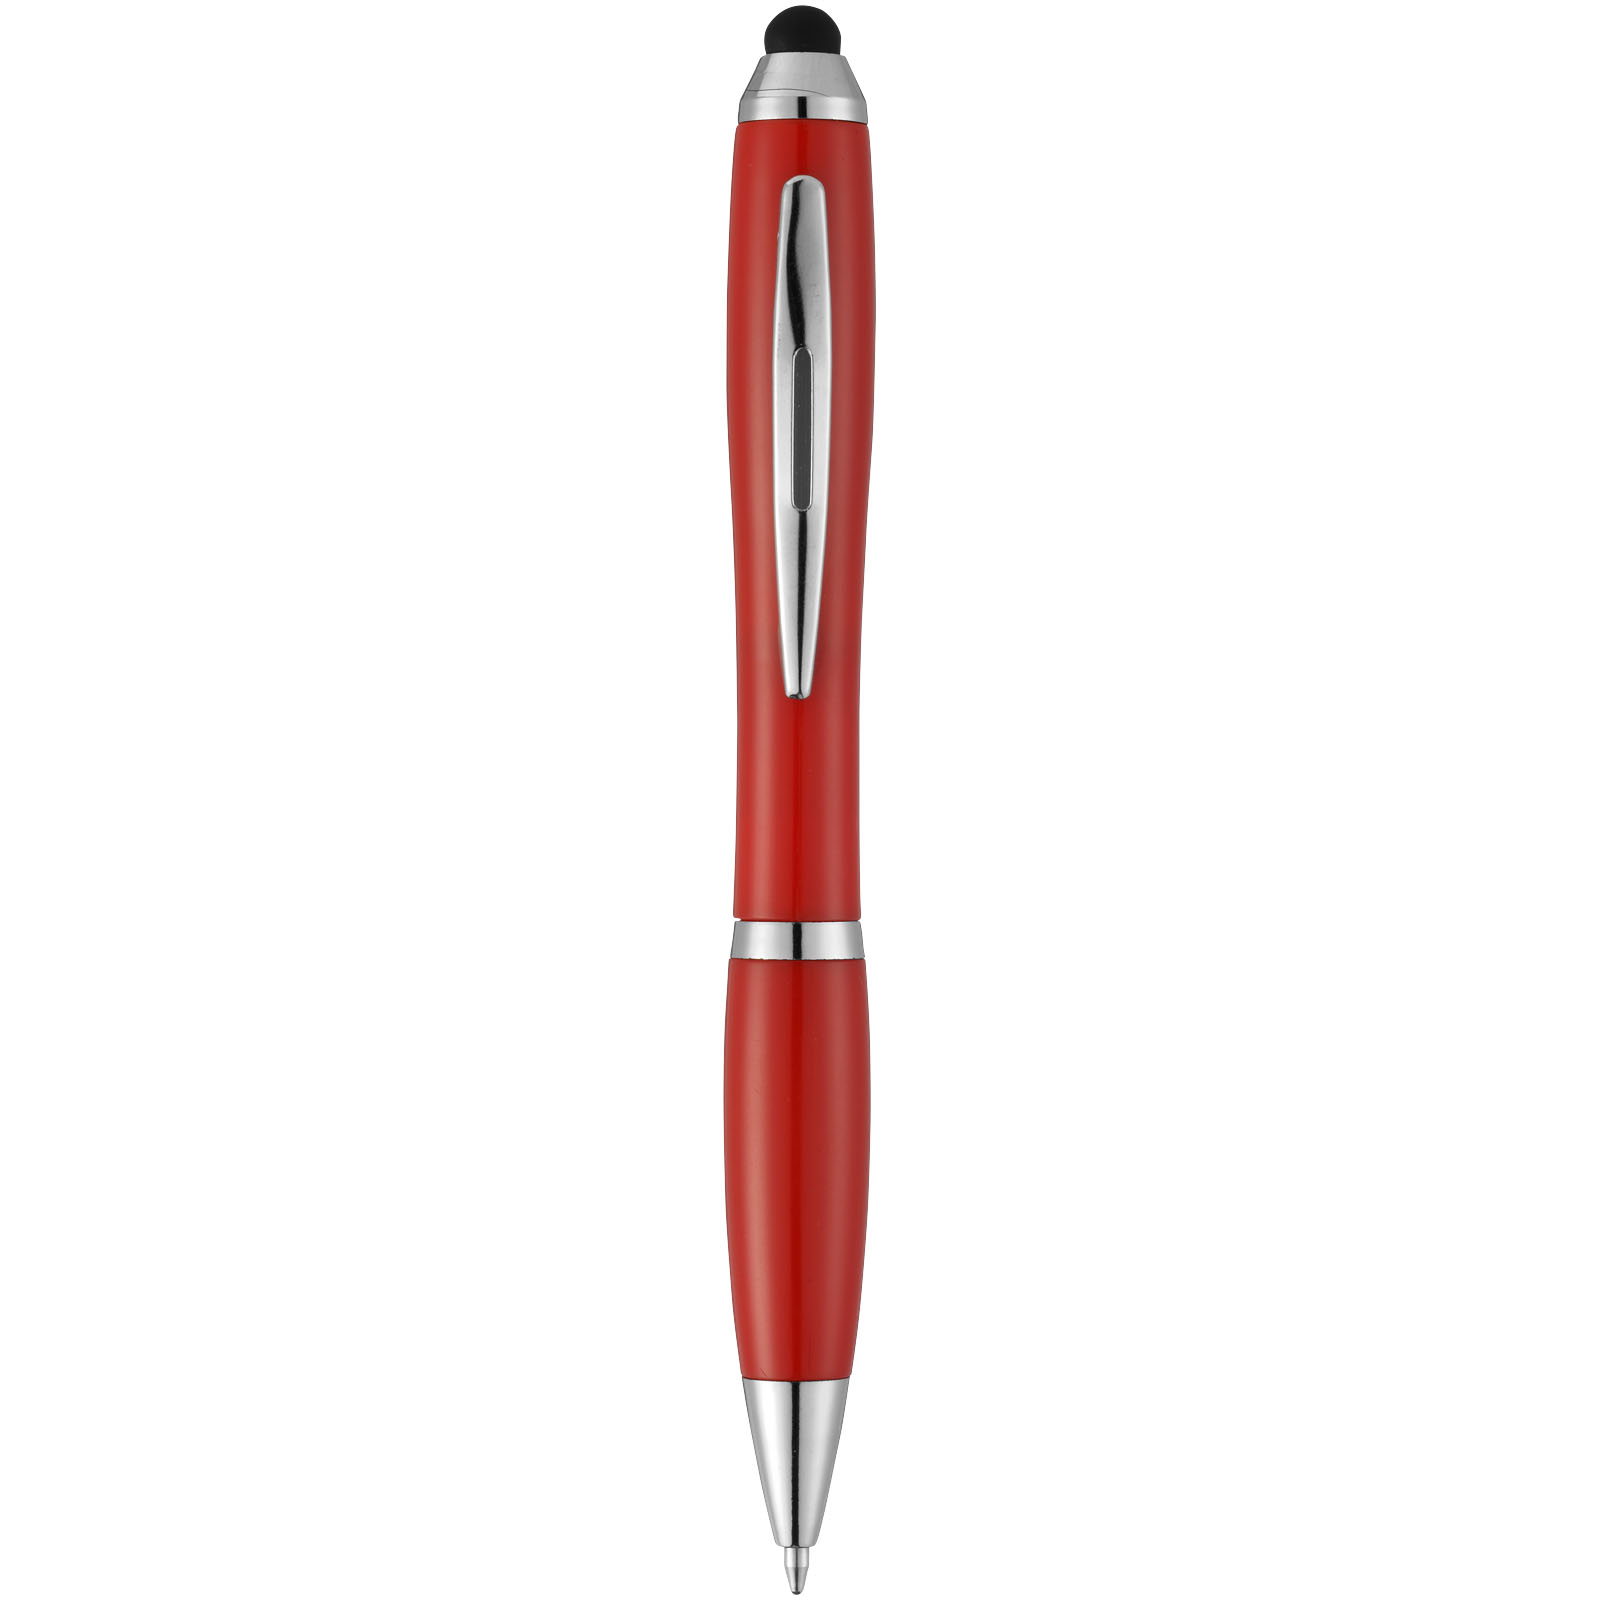 Stylos-bille publicitaires - Stylo stylet Nash - 0